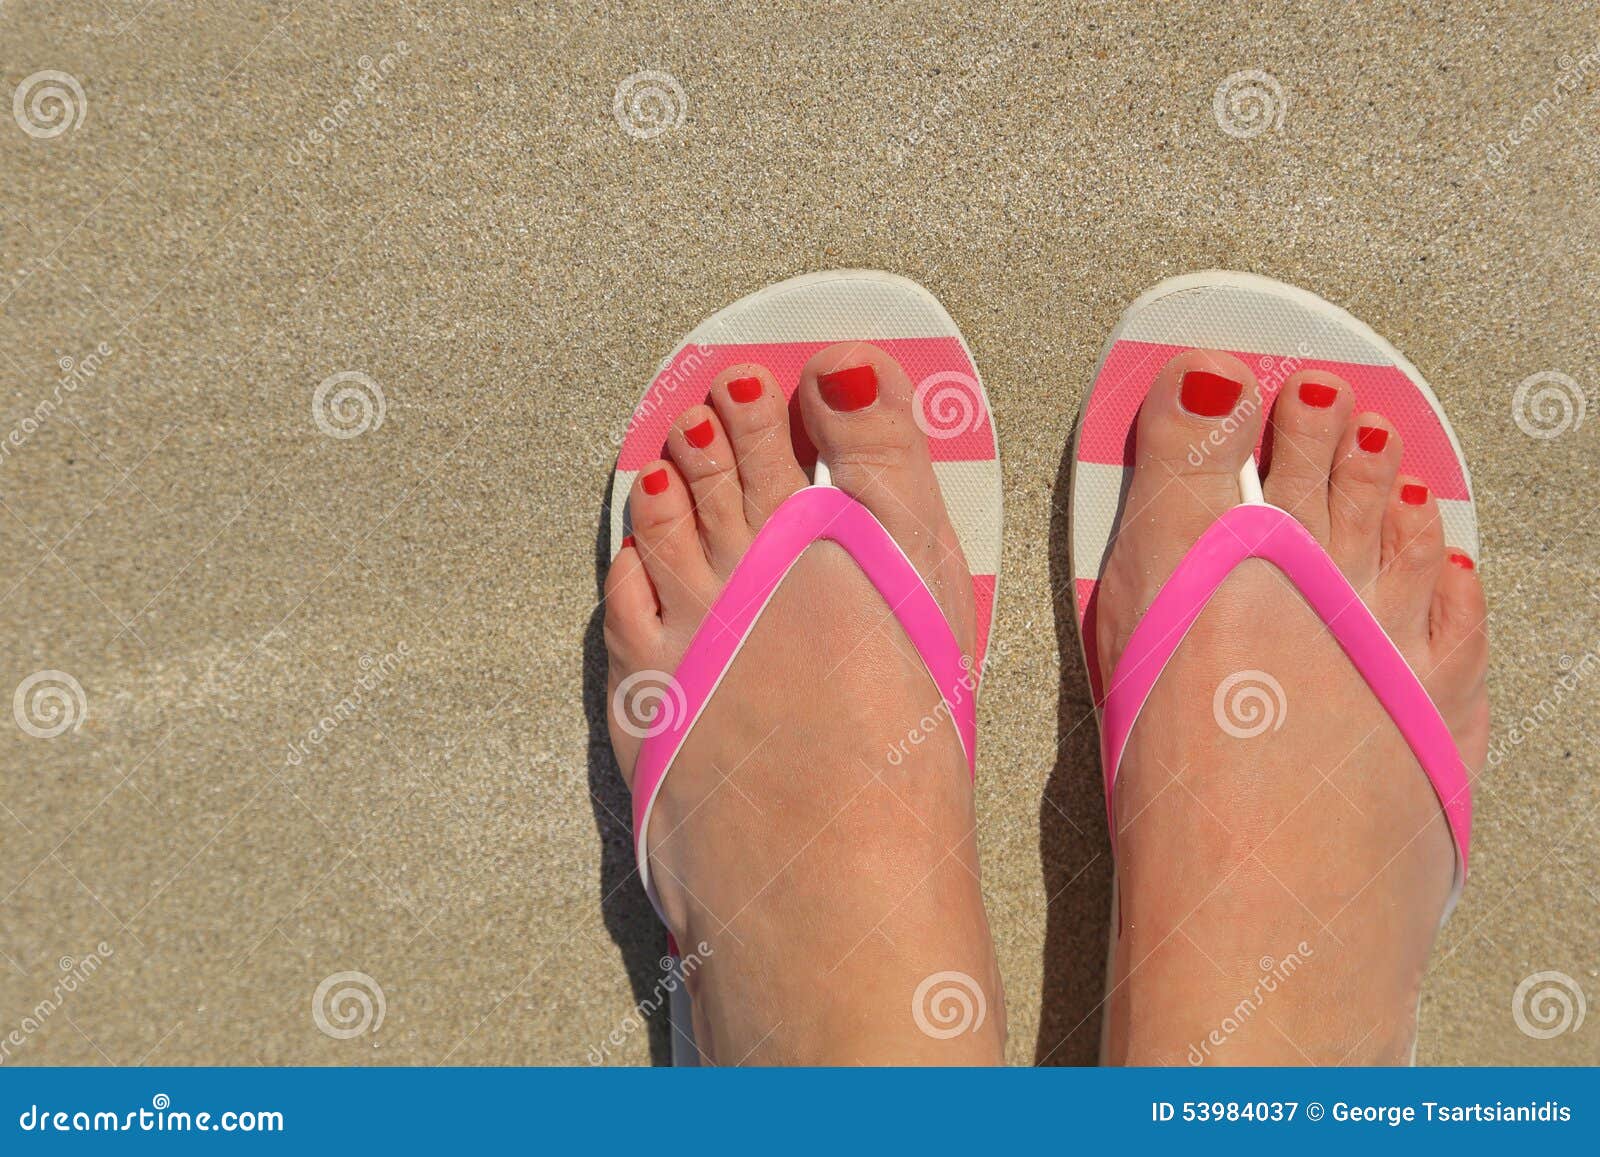 Womans Feet with Flip Flops Stock Image - Image of beauty, sandals ...